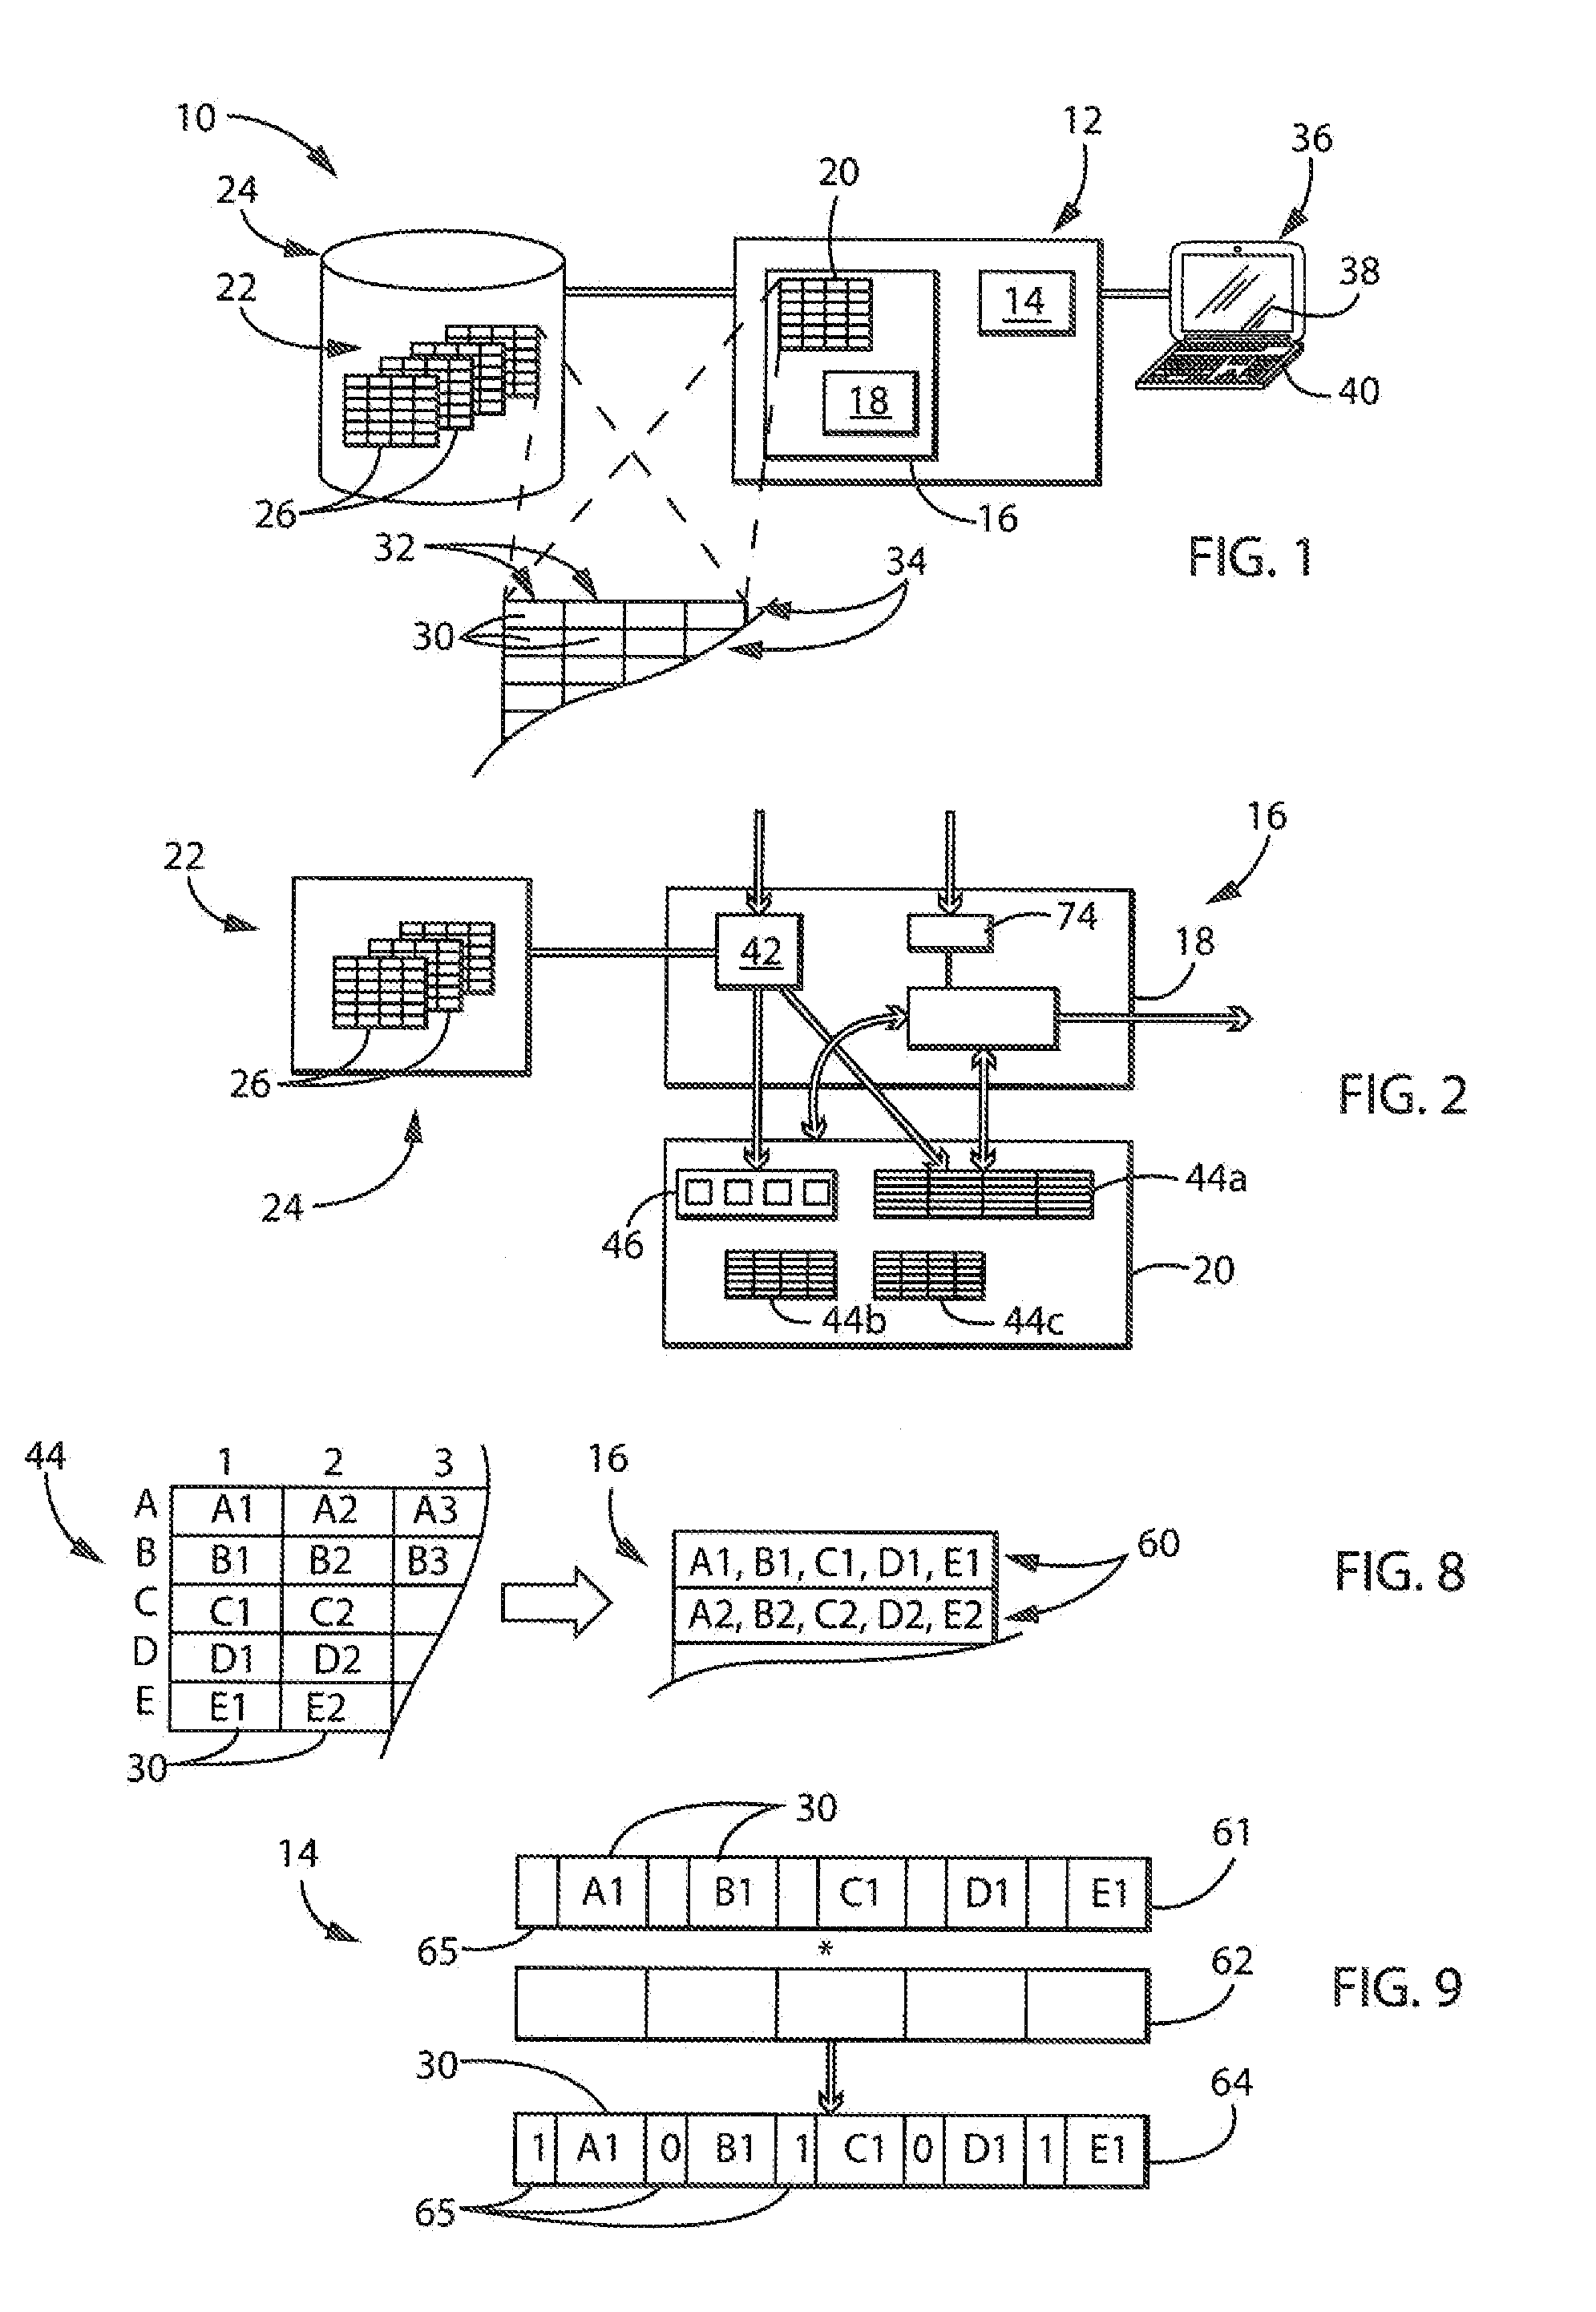 Database system with highly denormalized database structure